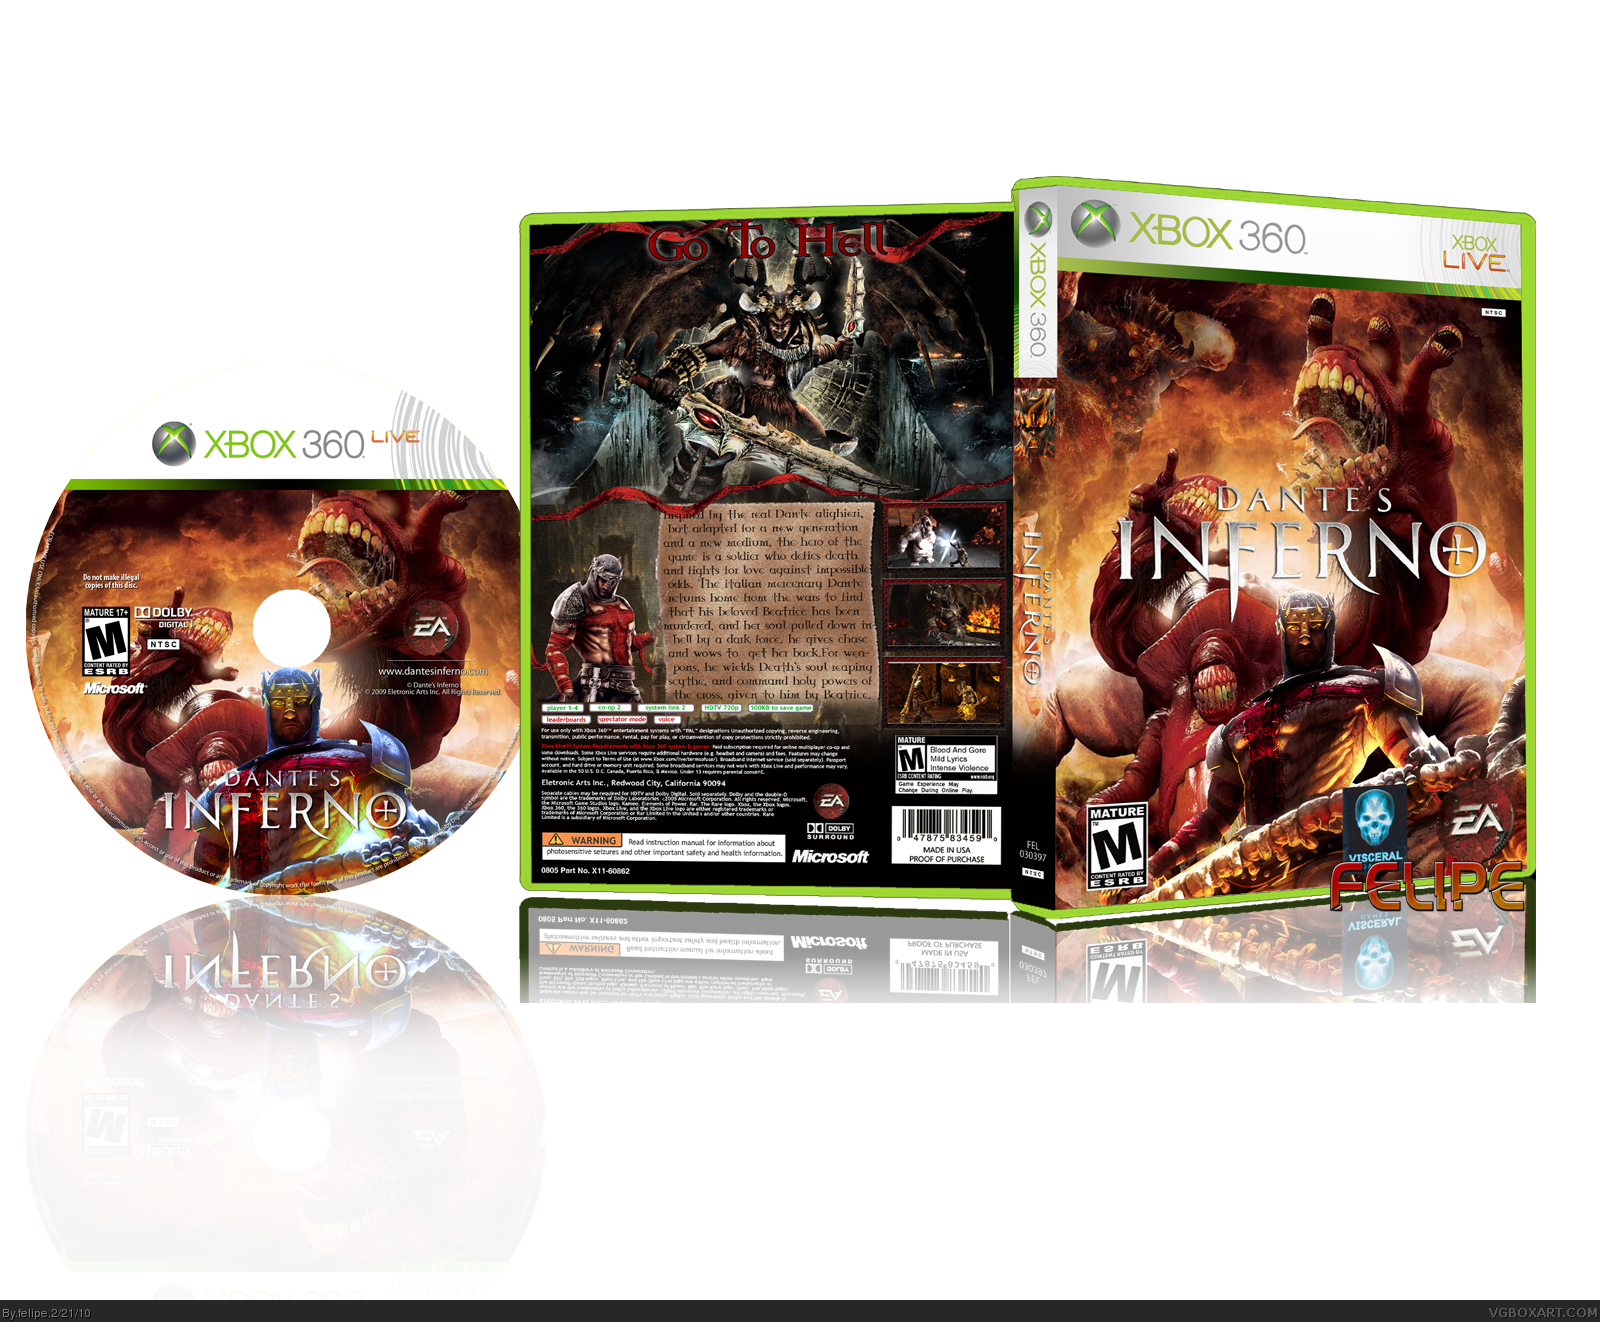 Dantes Inferno Xbox 360  Buy or Rent CD at Best Price